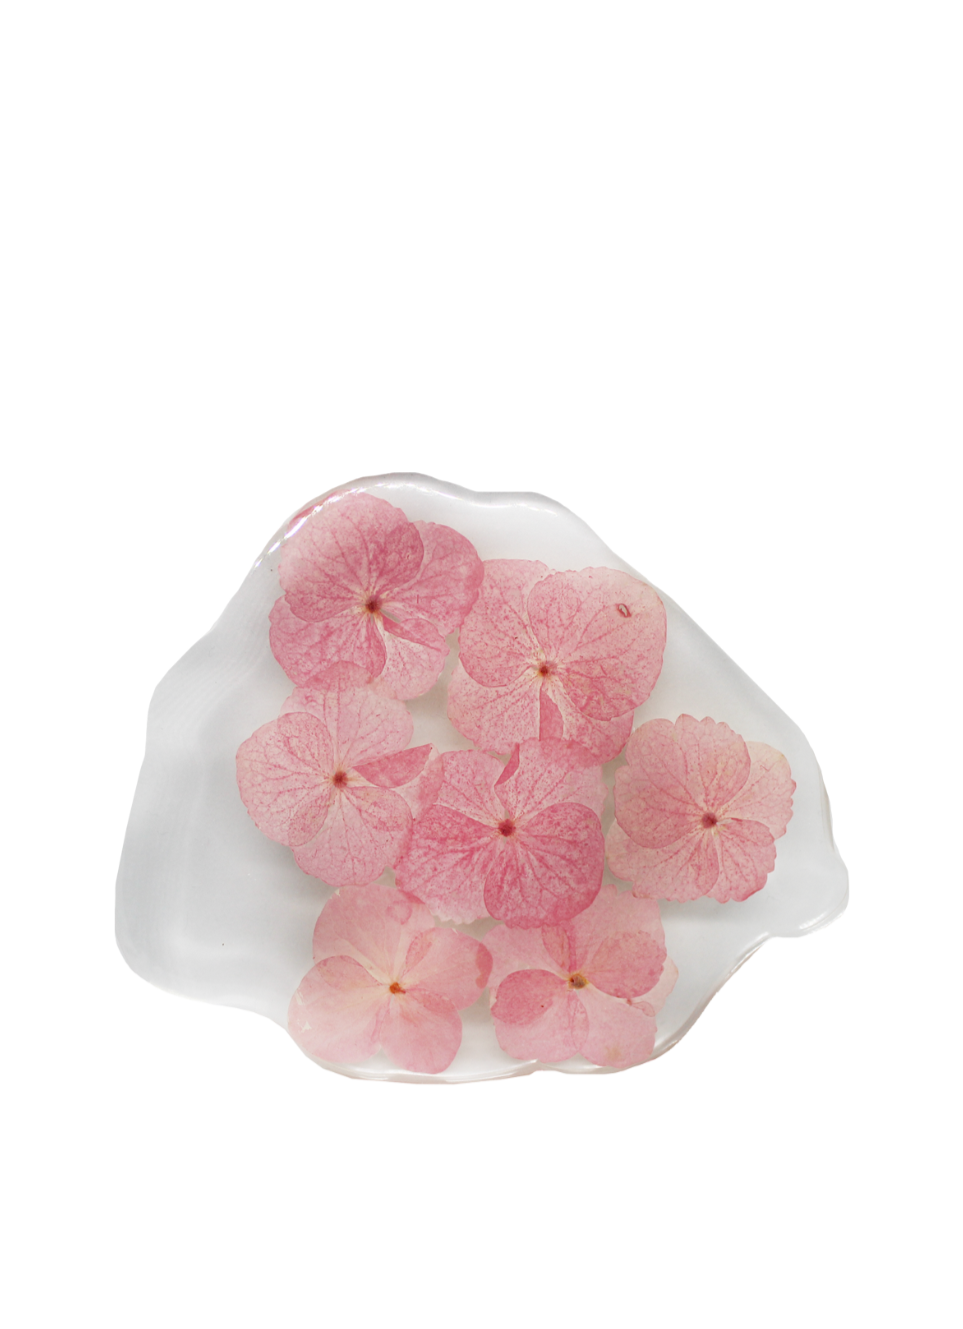 A handful of blush pink hydrangeas sit suspended in this cloud-shaped coaster.